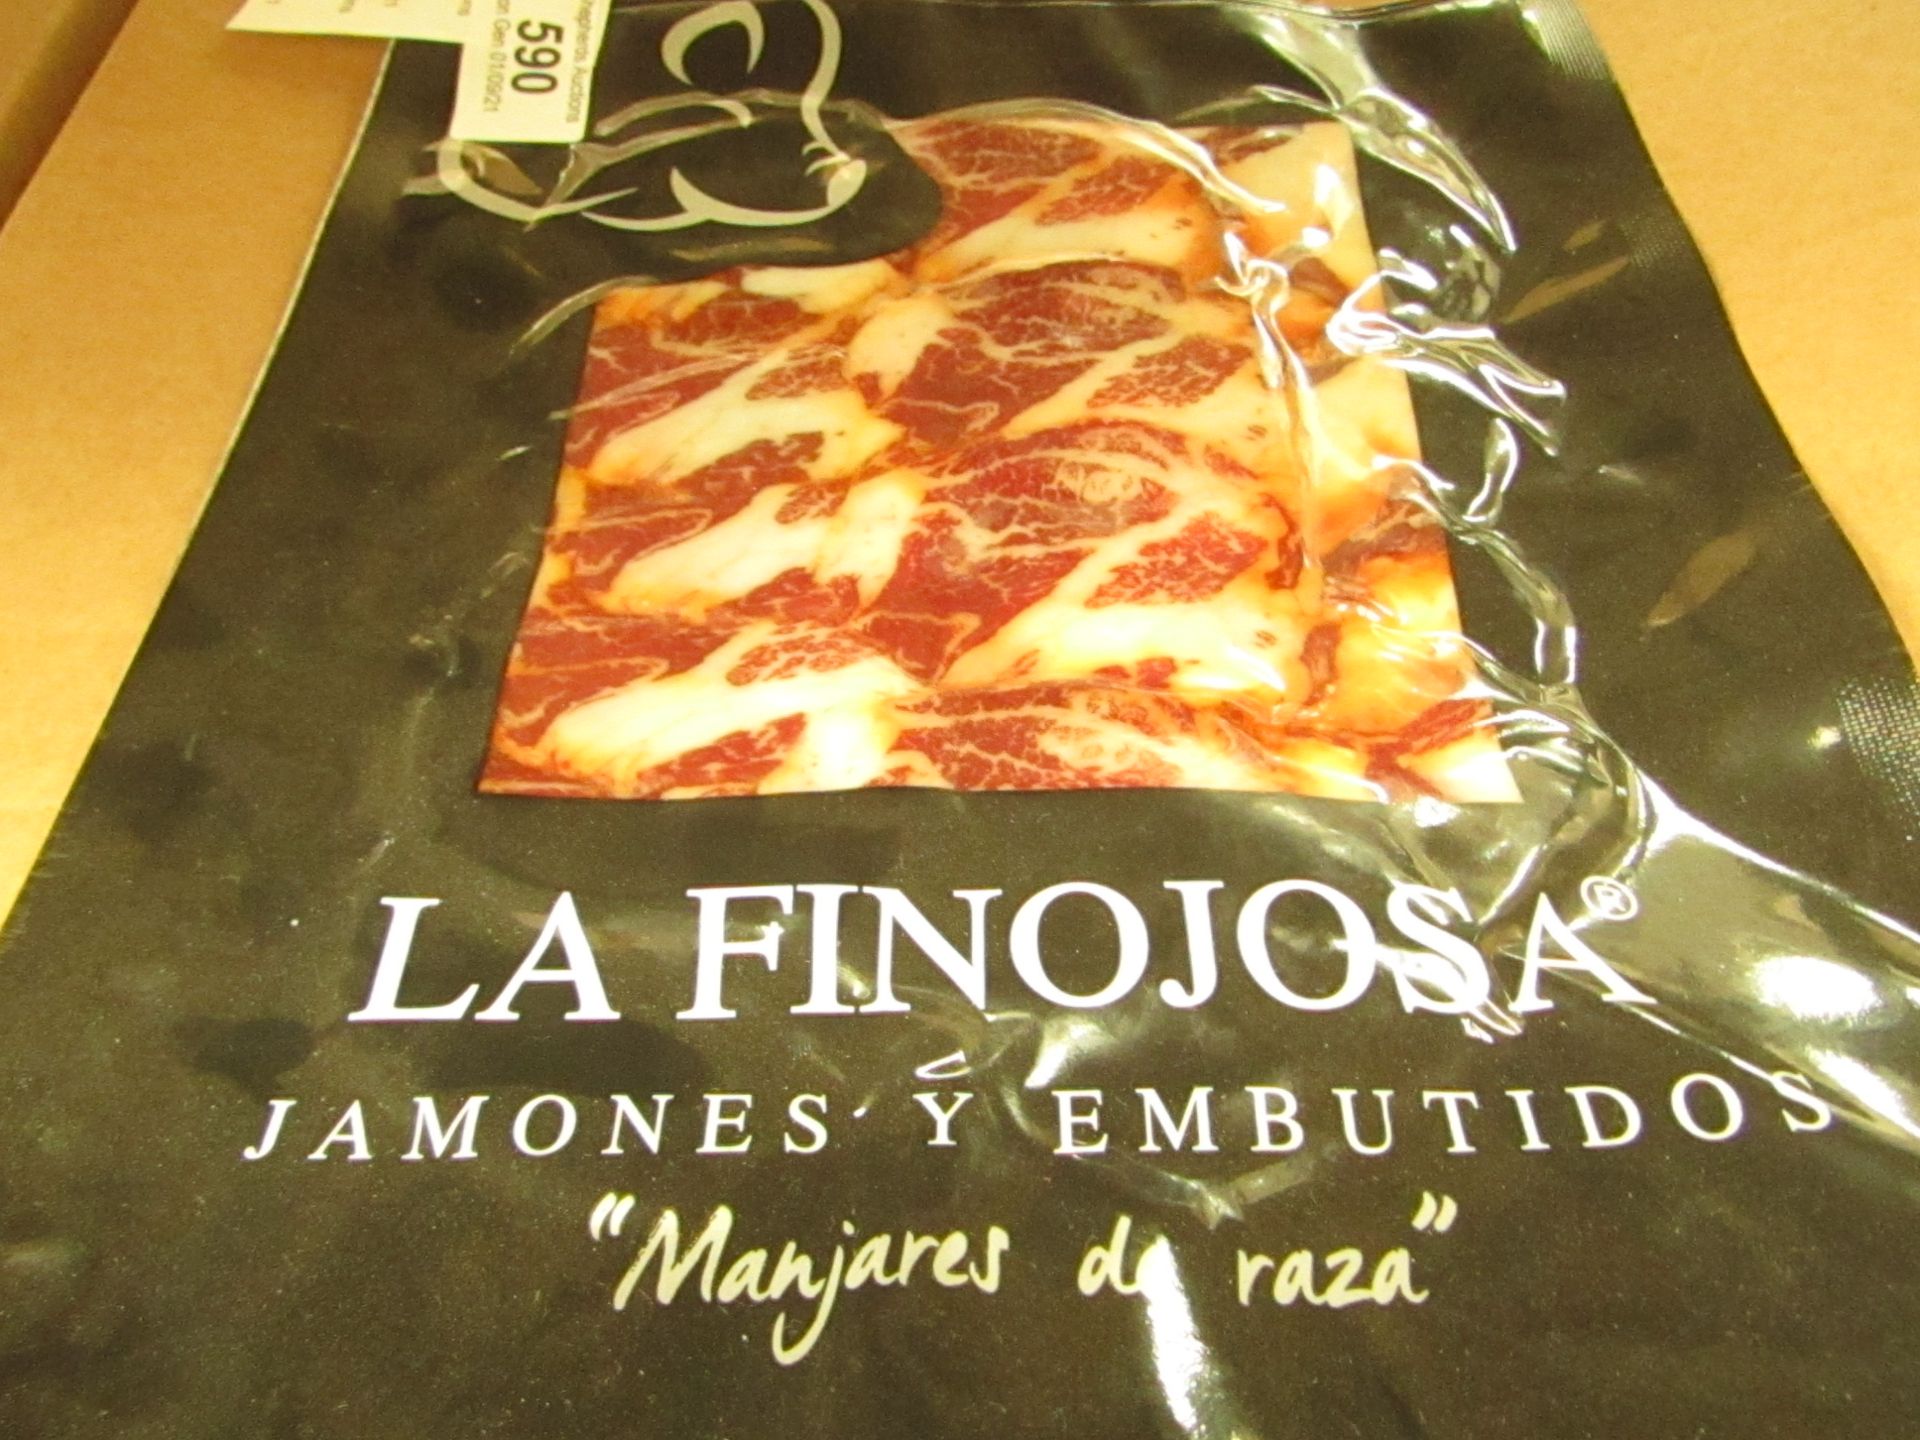 5x La Finojosa 100g packets Sliced Iberian cured ham in slices. BB 18.3.22 RRP £16.25 per packet